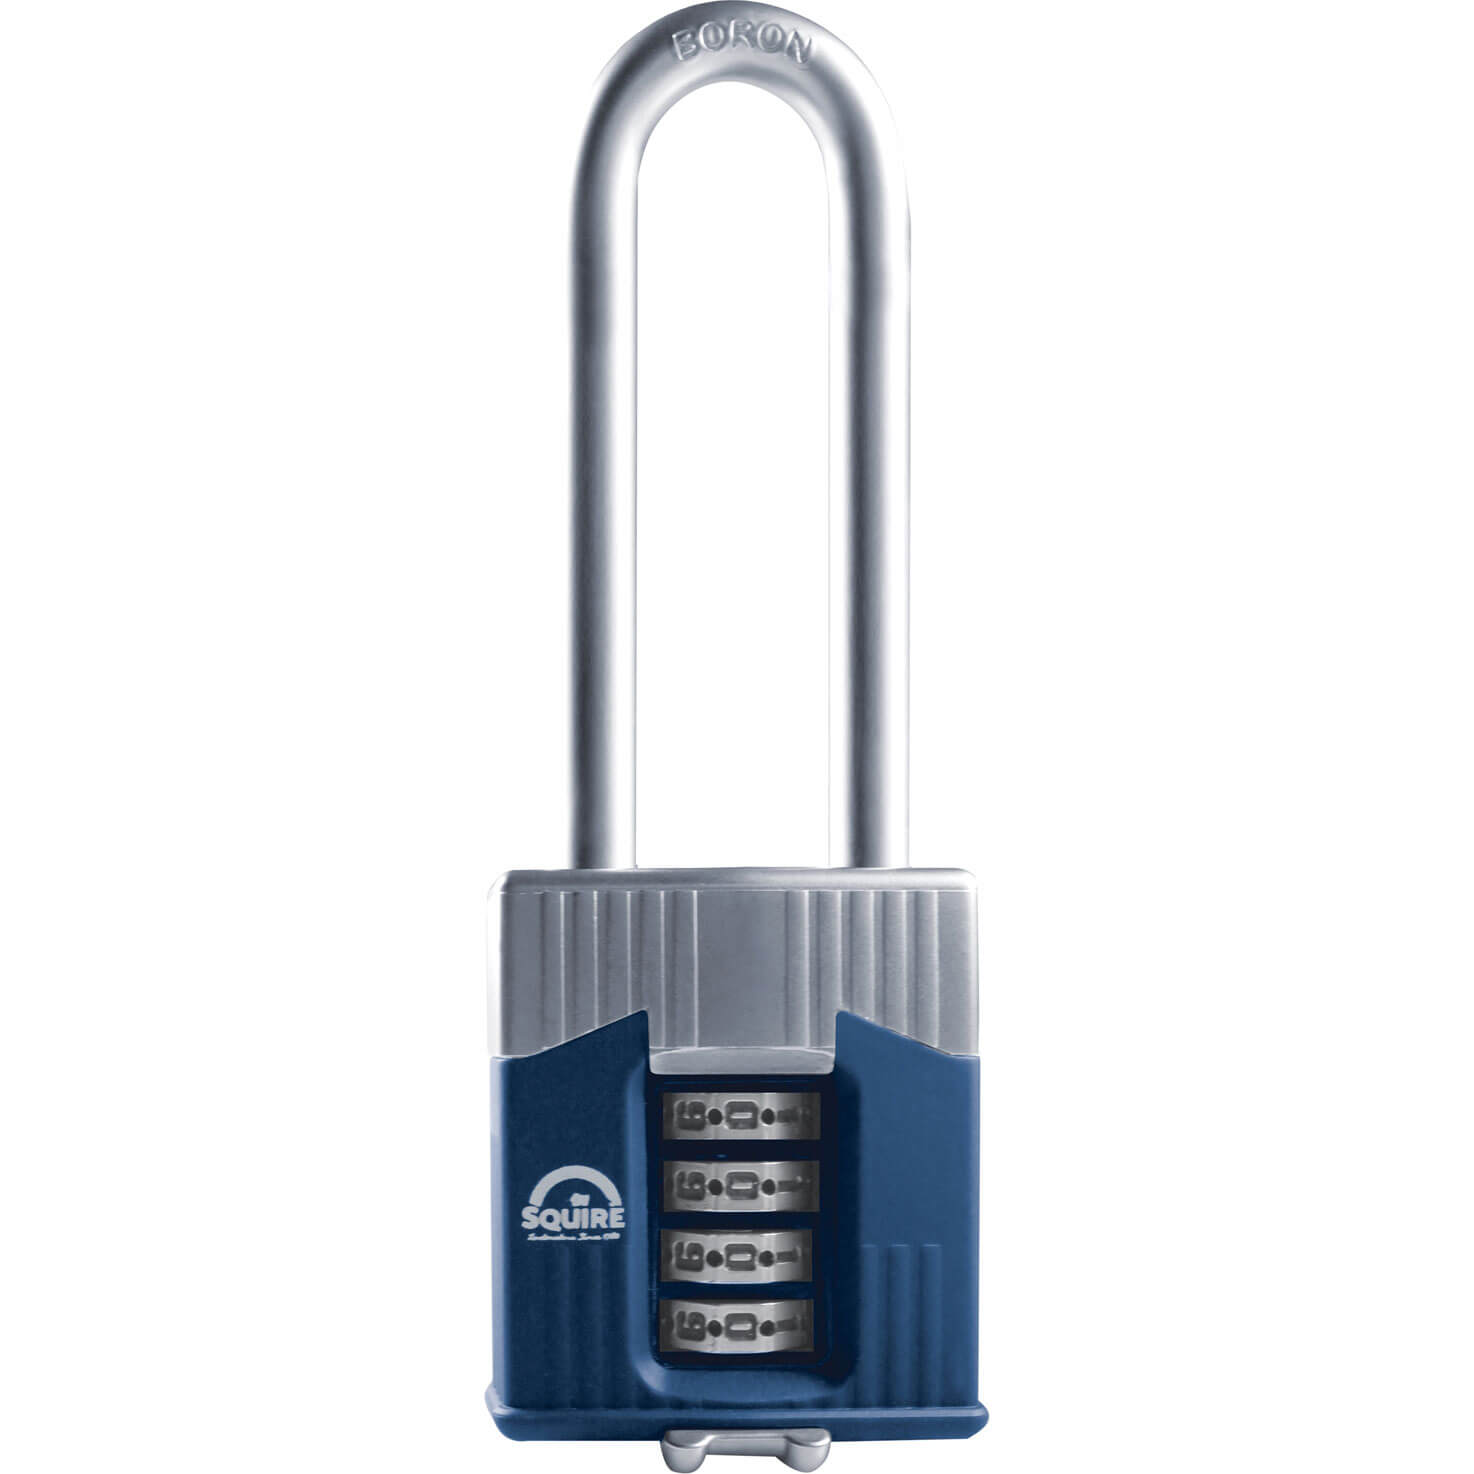 Henry Squire Warrior High Security Shackle Combination Padlock 45mm Long